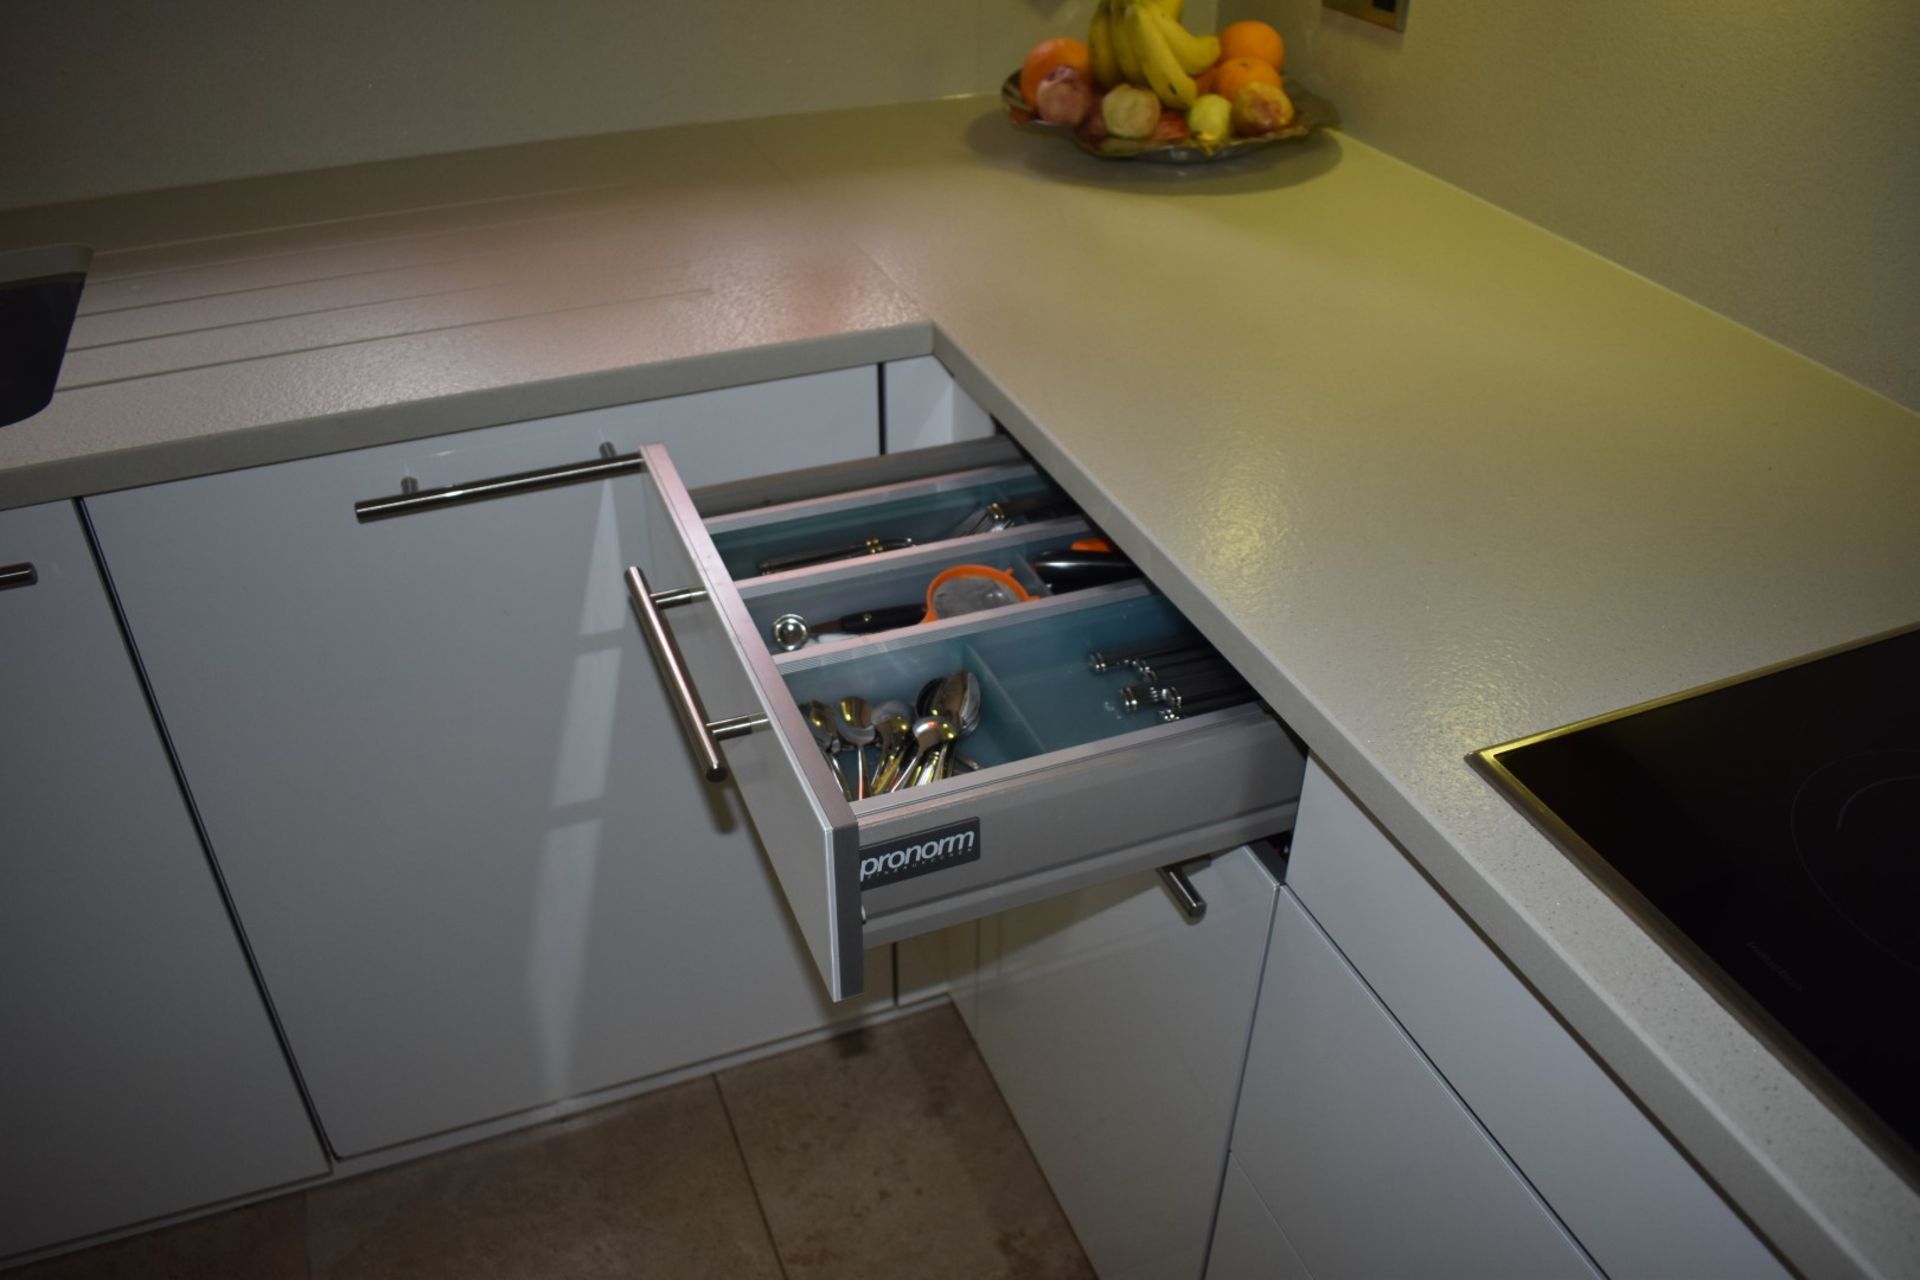 1 x Pronorm Einbauküchen German Made Fitted Kitchen With Contemporary High Gloss Cream Doors and - Image 11 of 50